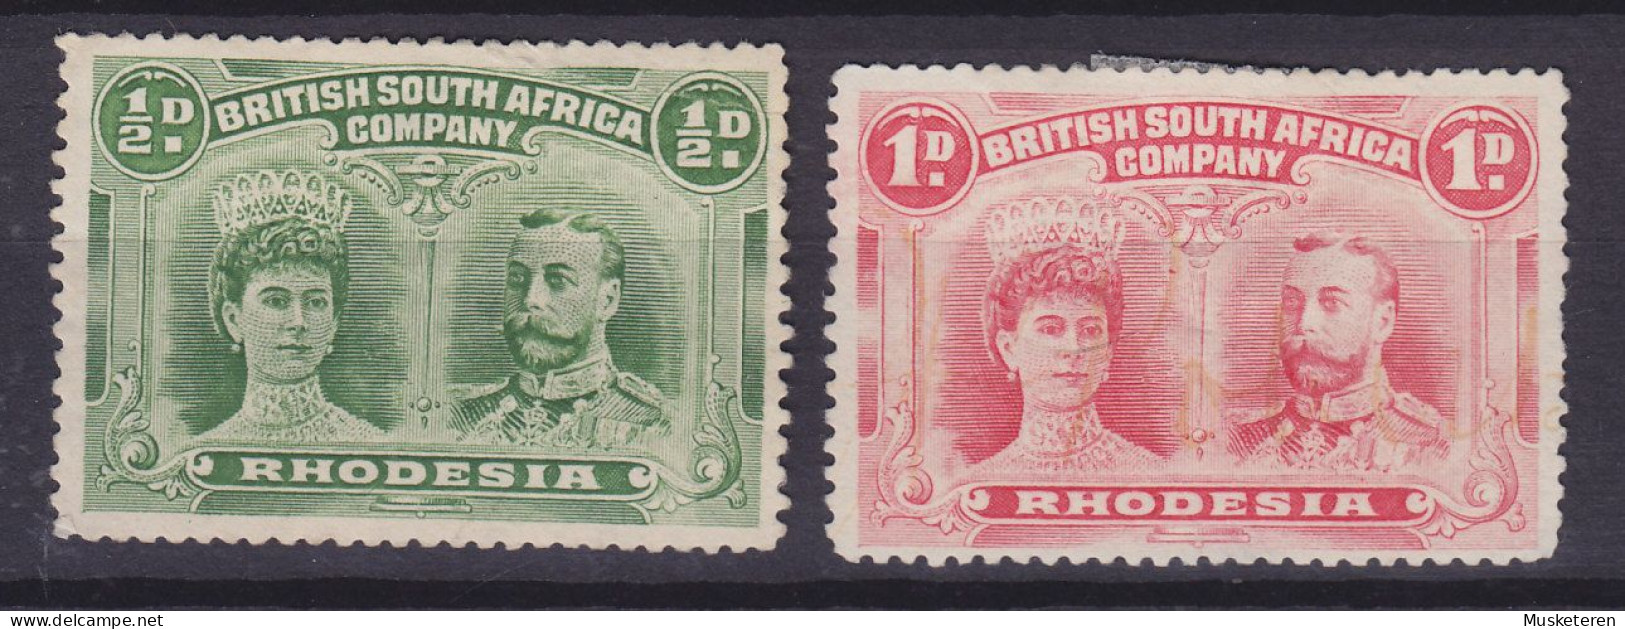 British South Africa Company 1910 Mi. 101c, 102, ½P & 1P King George V. & Queen Mary 'Double Heads' Issue, MNG(*) - Ohne Zuordnung